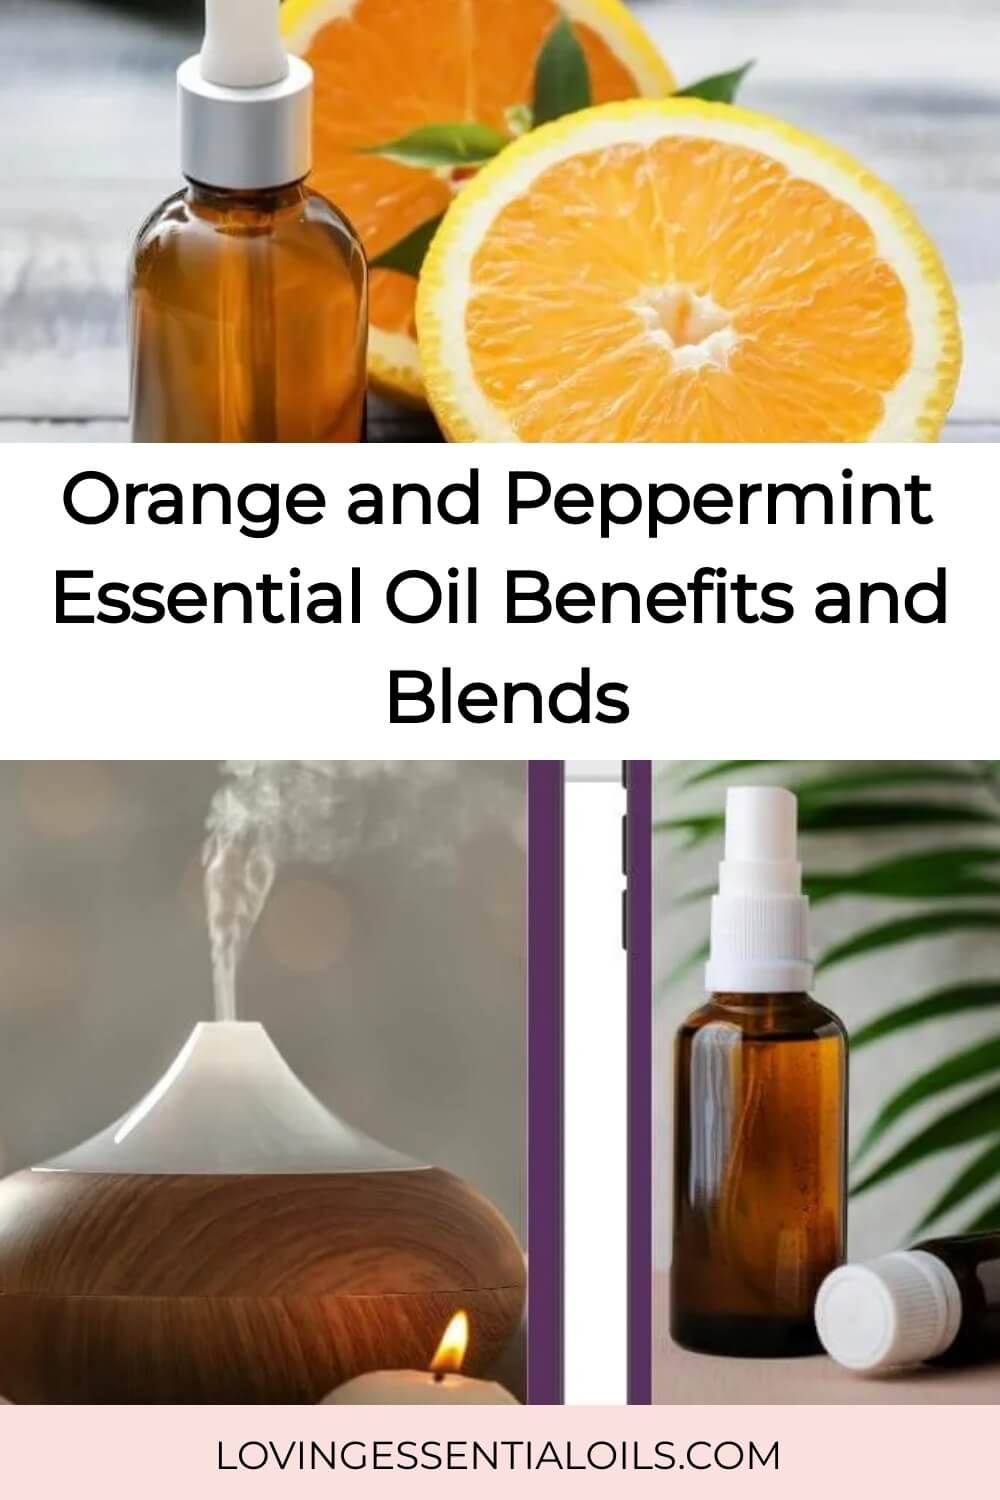 Orange and Peppermint Essential Oils Combo